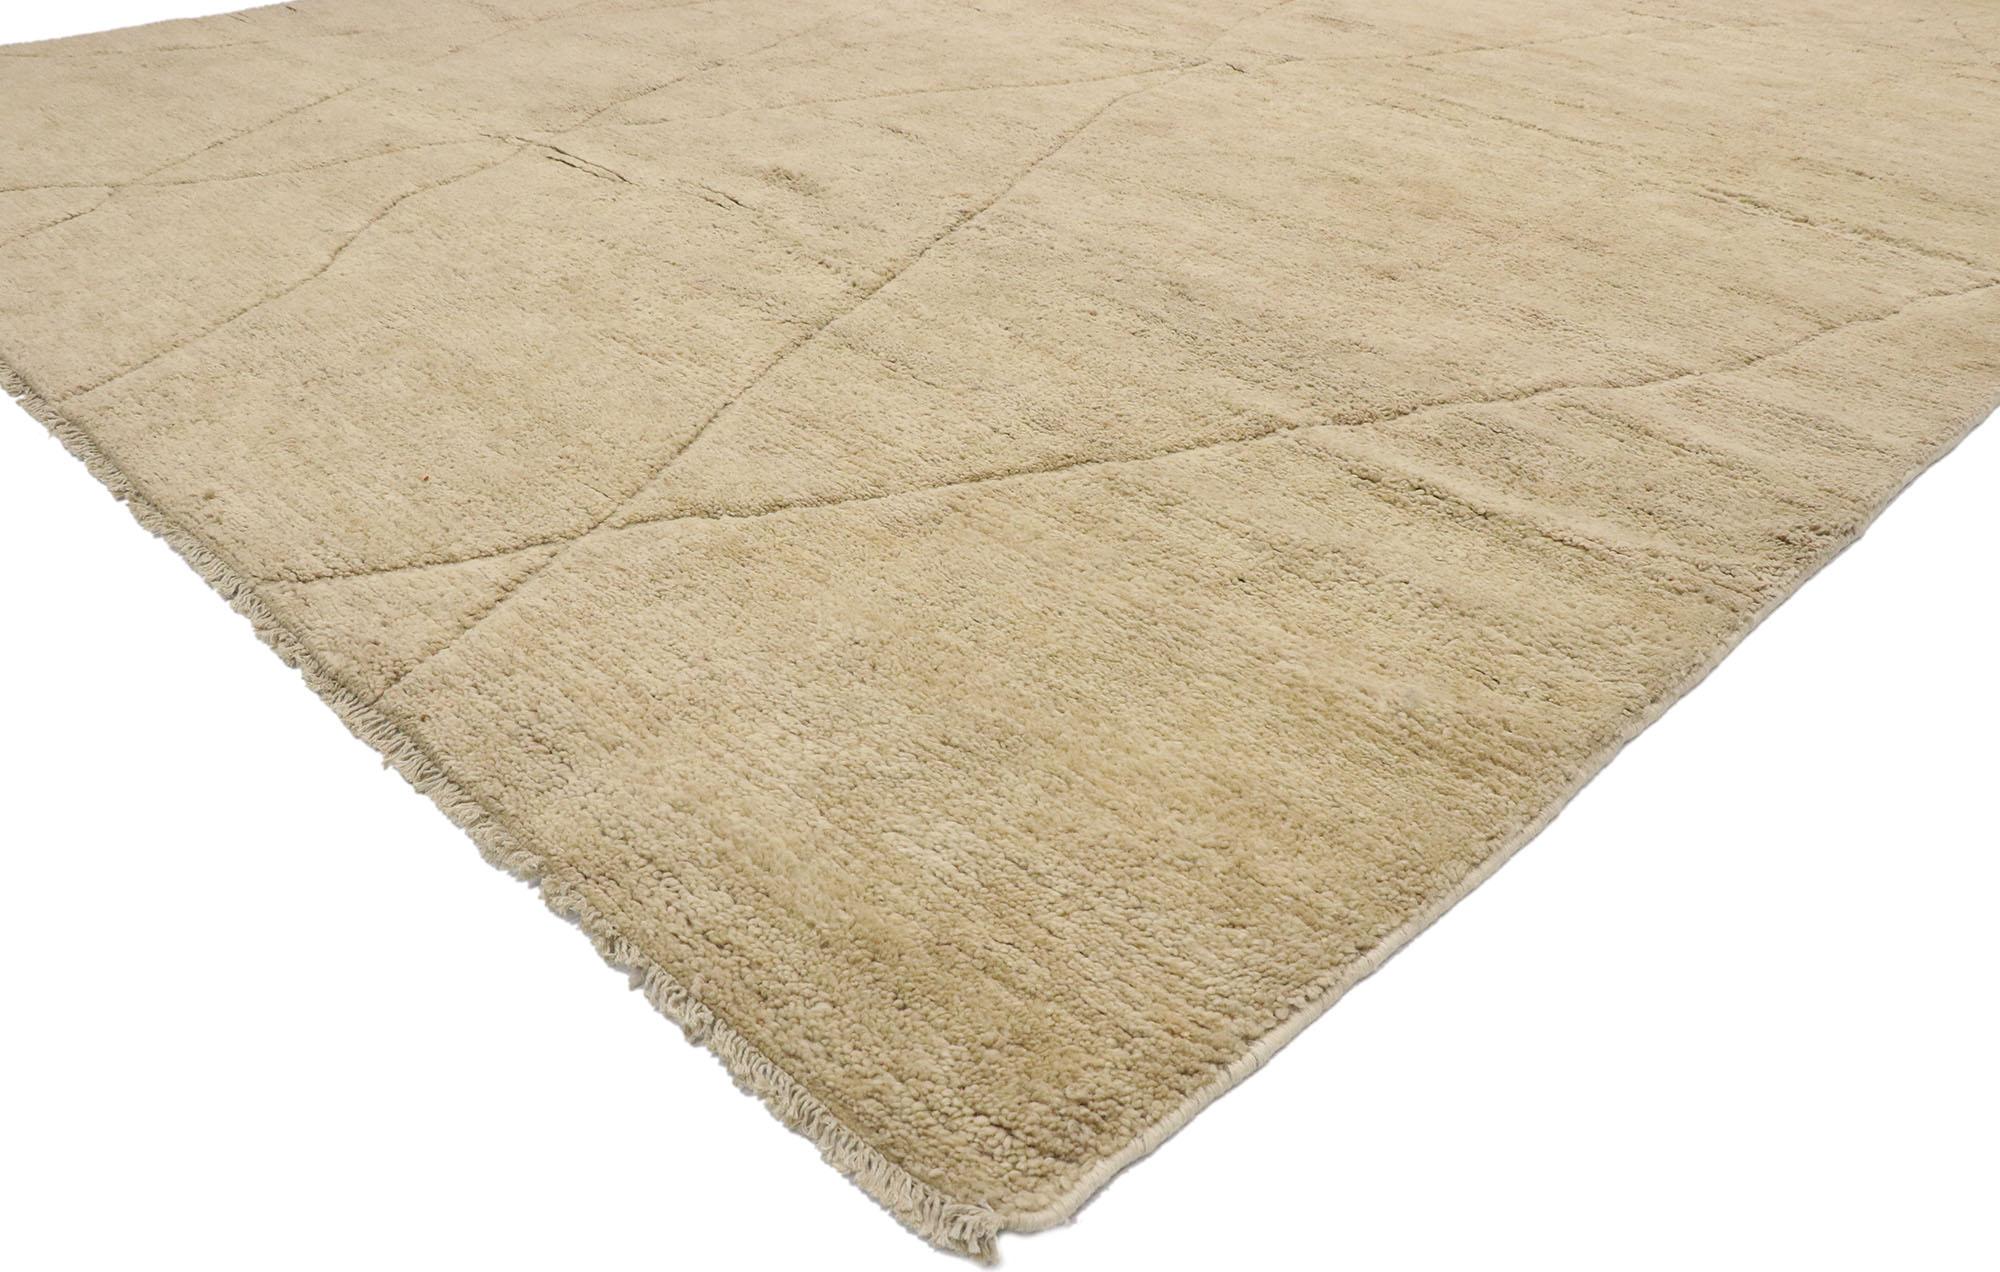 80652, new contemporary Moroccan rug with Minimalist Swedish Mysigt style. Effortless beauty and simplicity meet soft, Mysigt style in this hand knotted wool contemporary Moroccan rug. The warm tan colored field features an all-over geometric